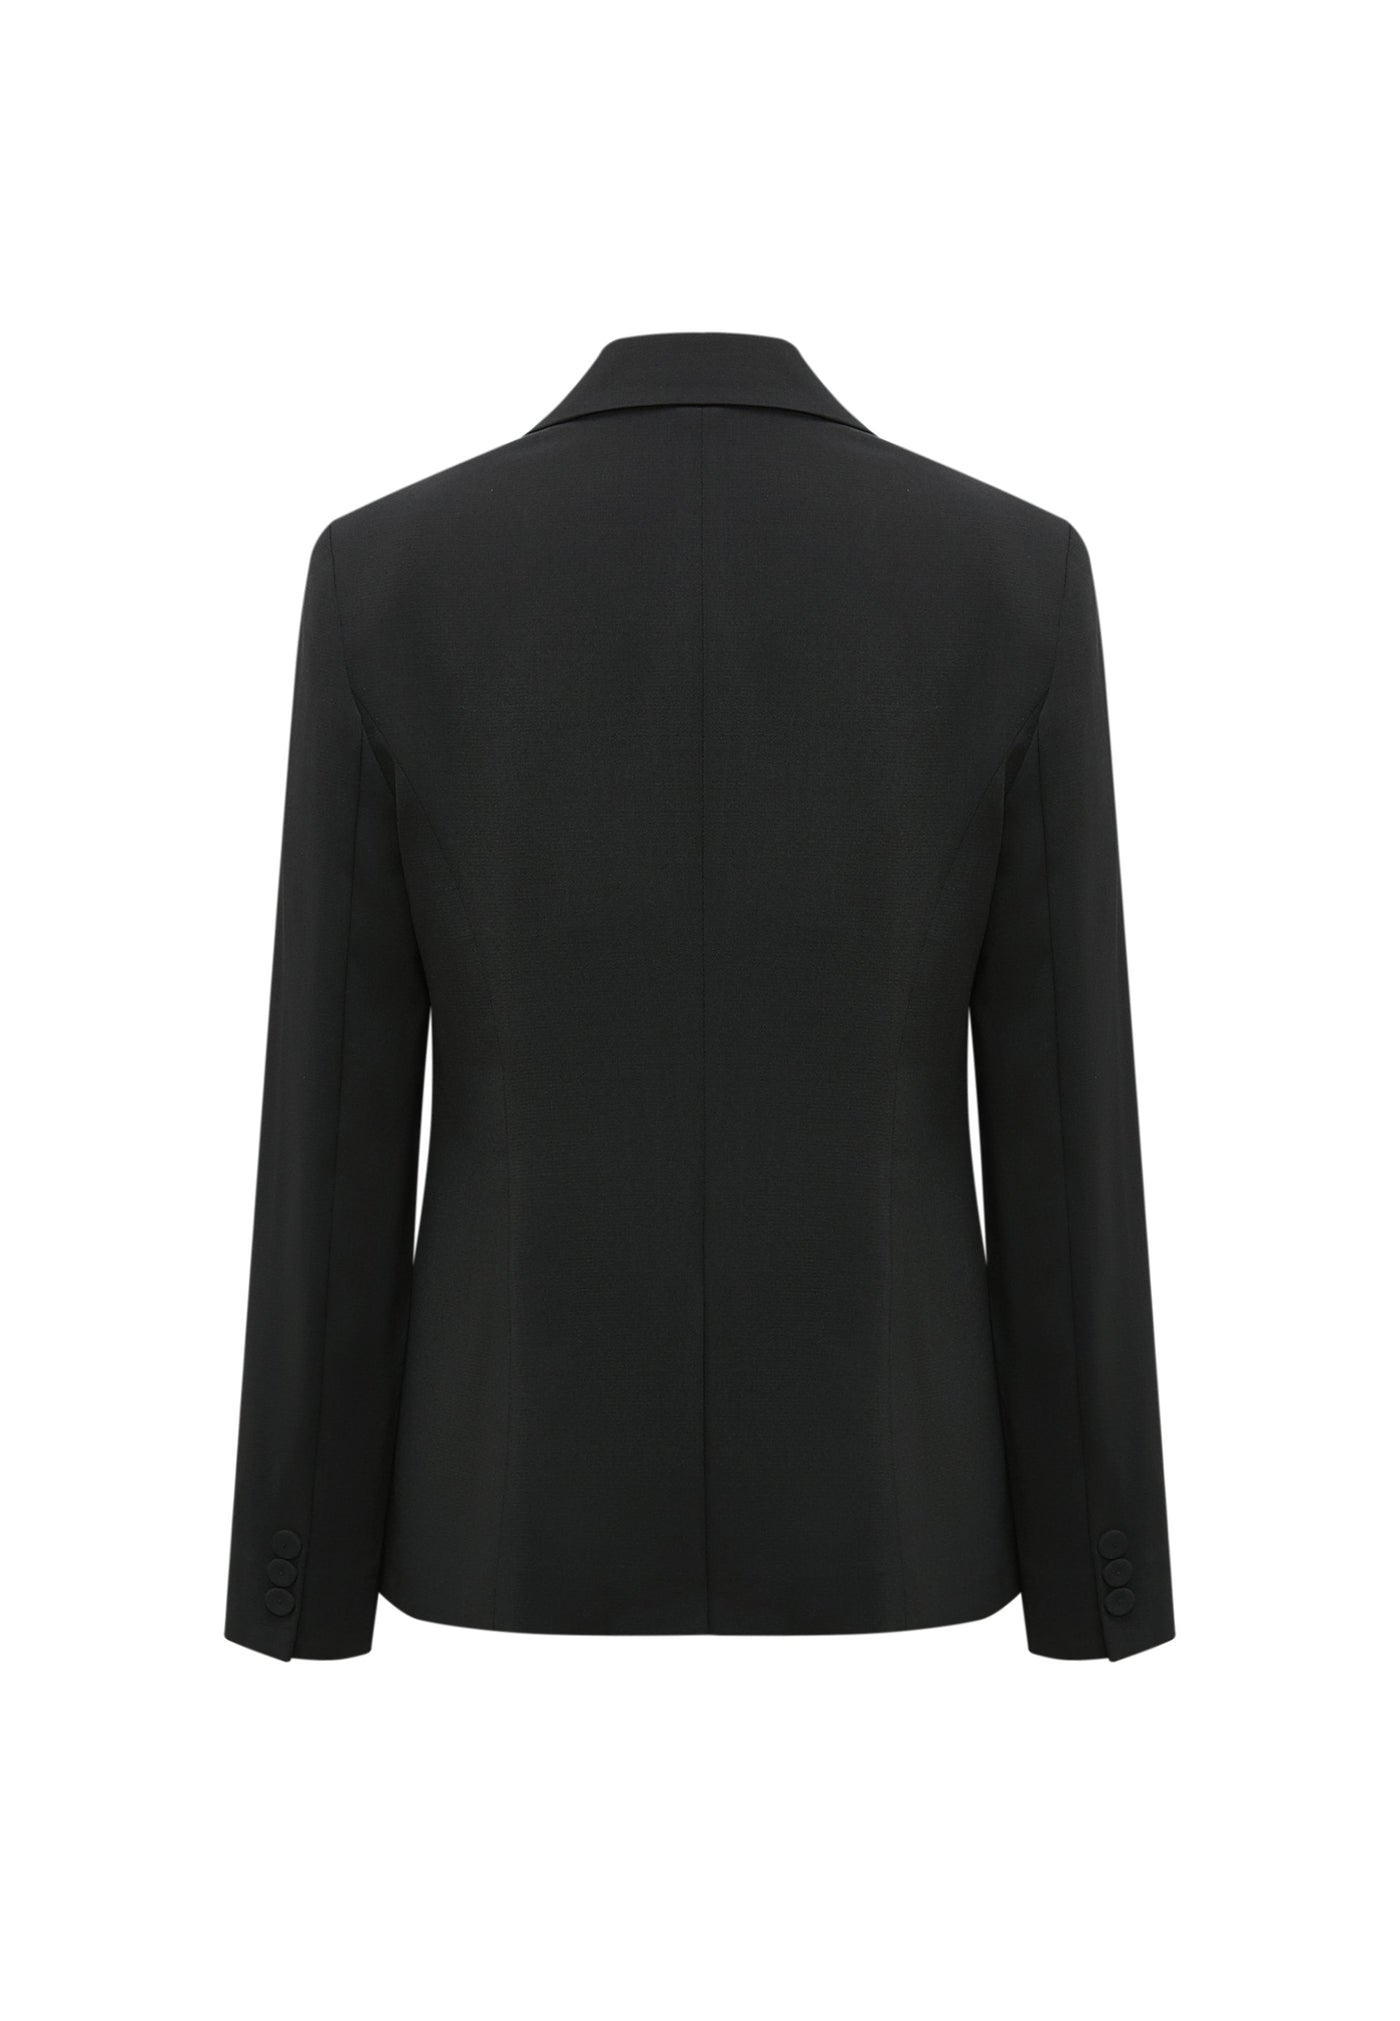 Women Clothing Cool Touch Suit Blazer Easy Fit